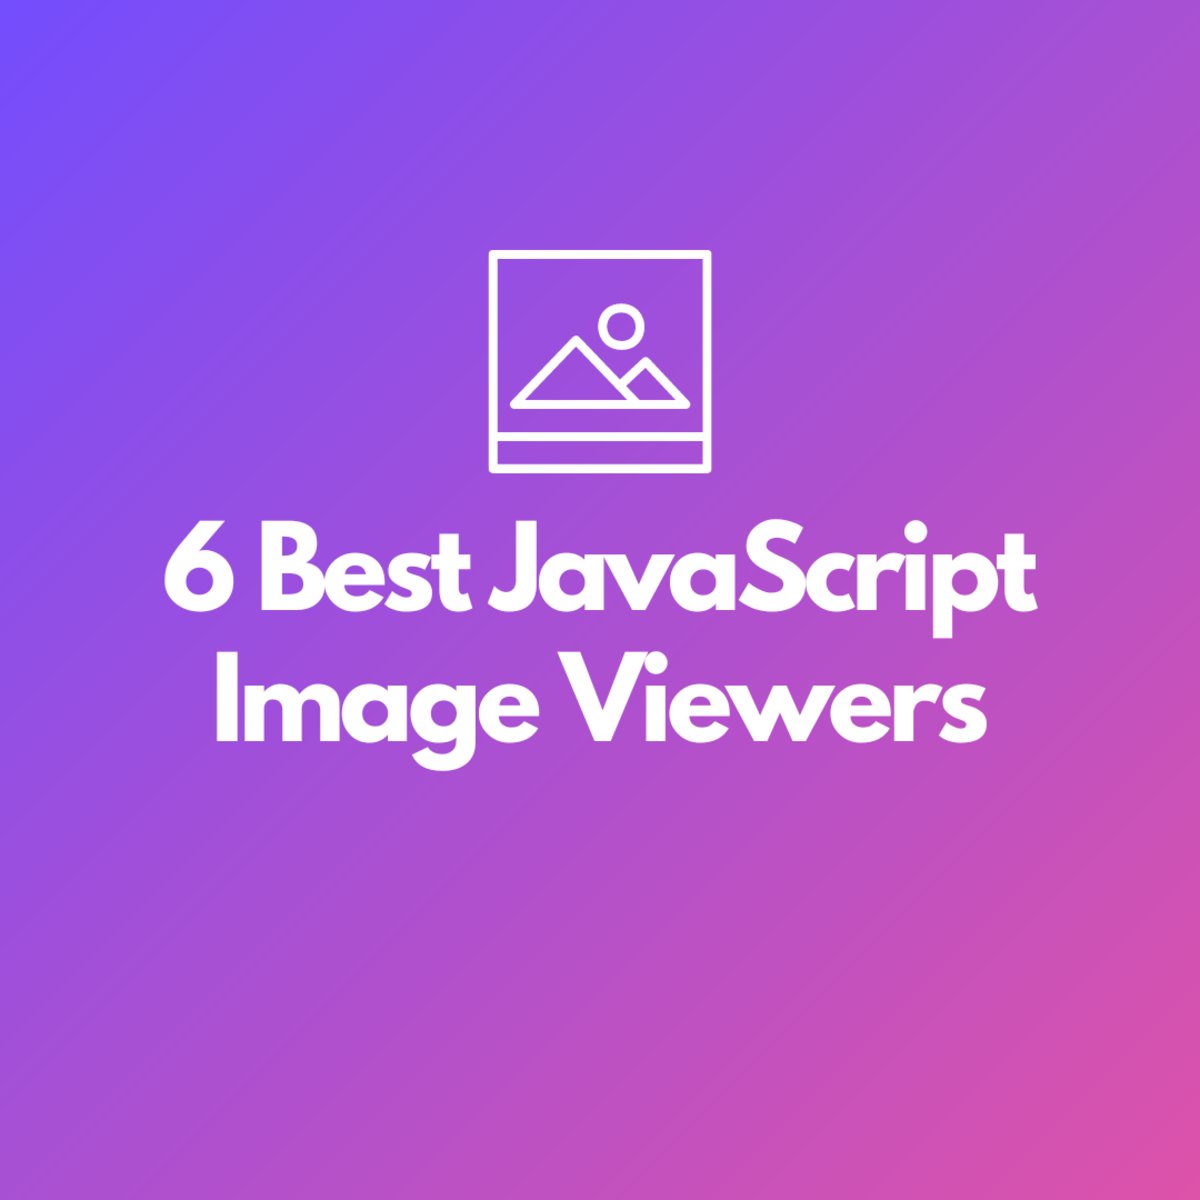 6 Best JavaScript Image Viewers to Check Out: The Ultimate List